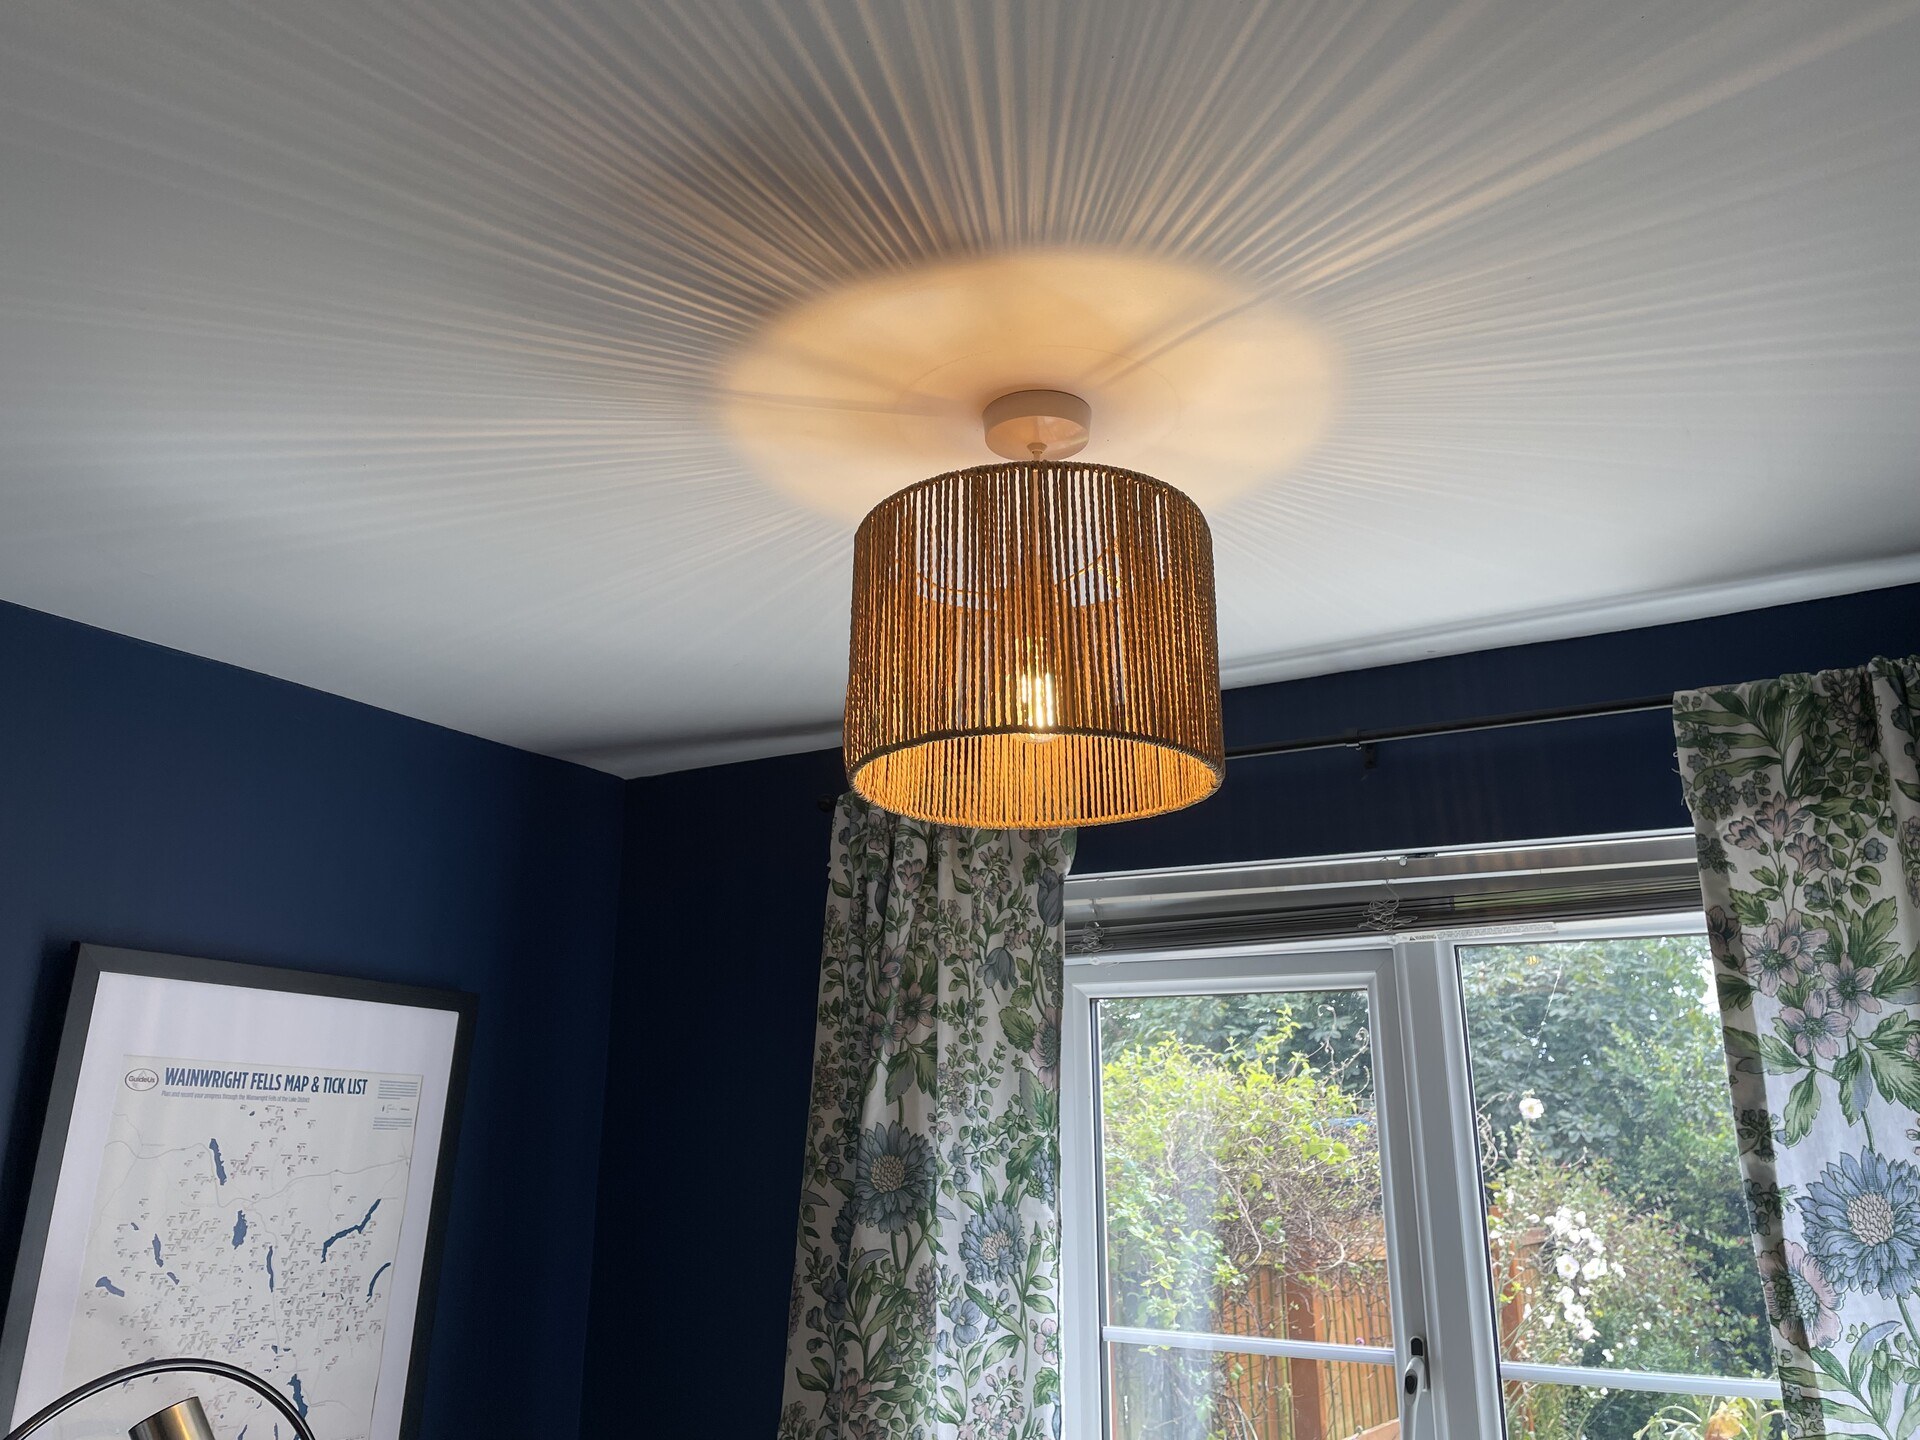 A hanging ceiling light, illuminated from within & casting shadows on the ceiling around it